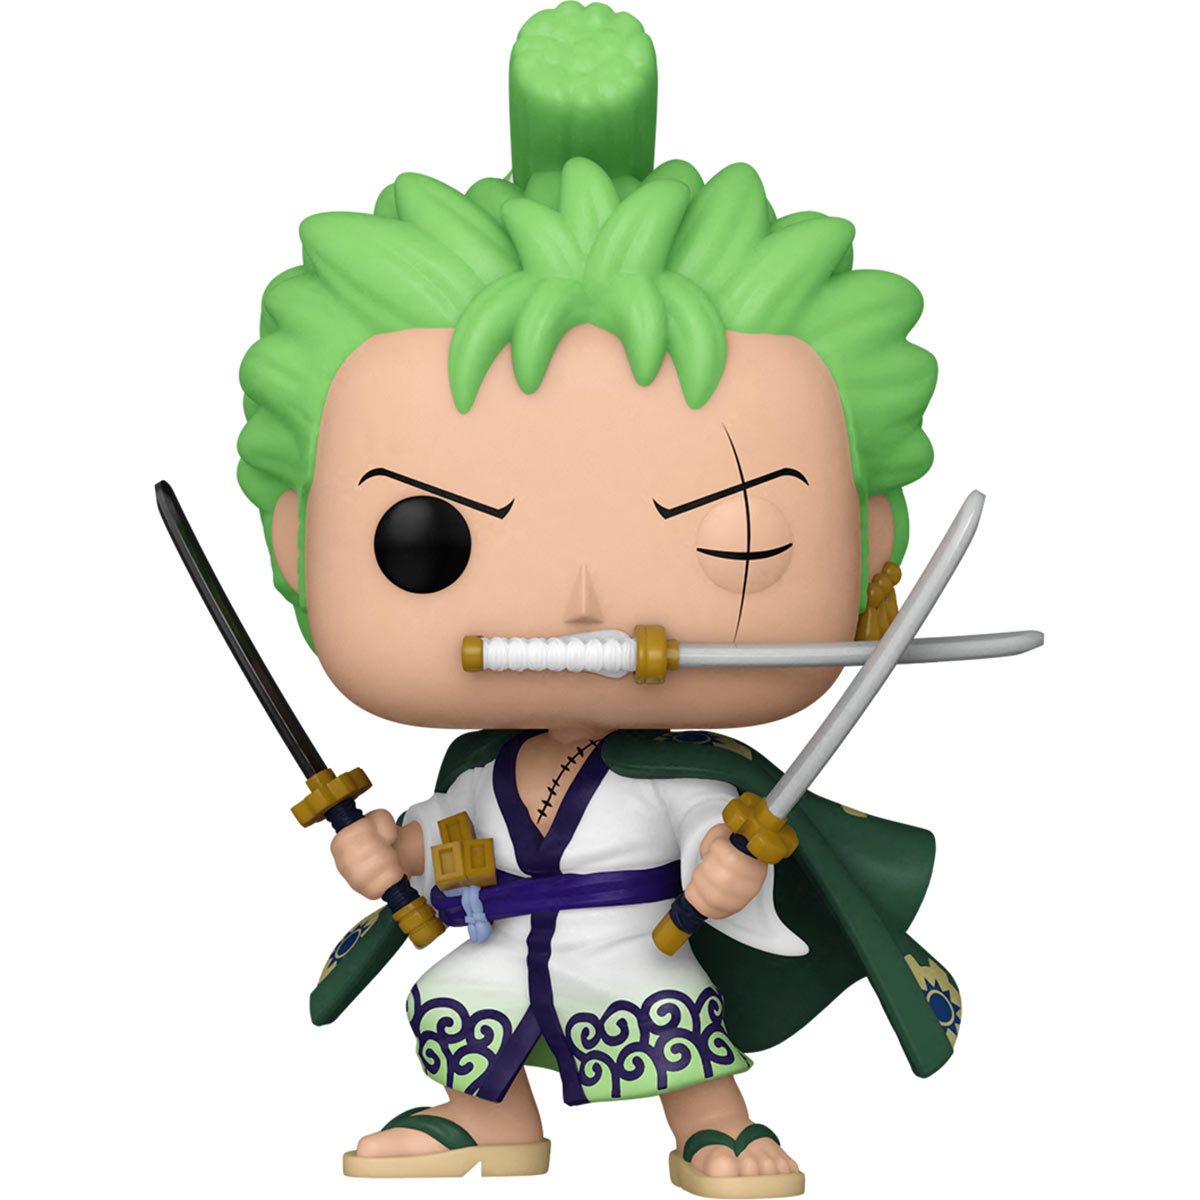 Who is Roronoa Zoro in One Piece?